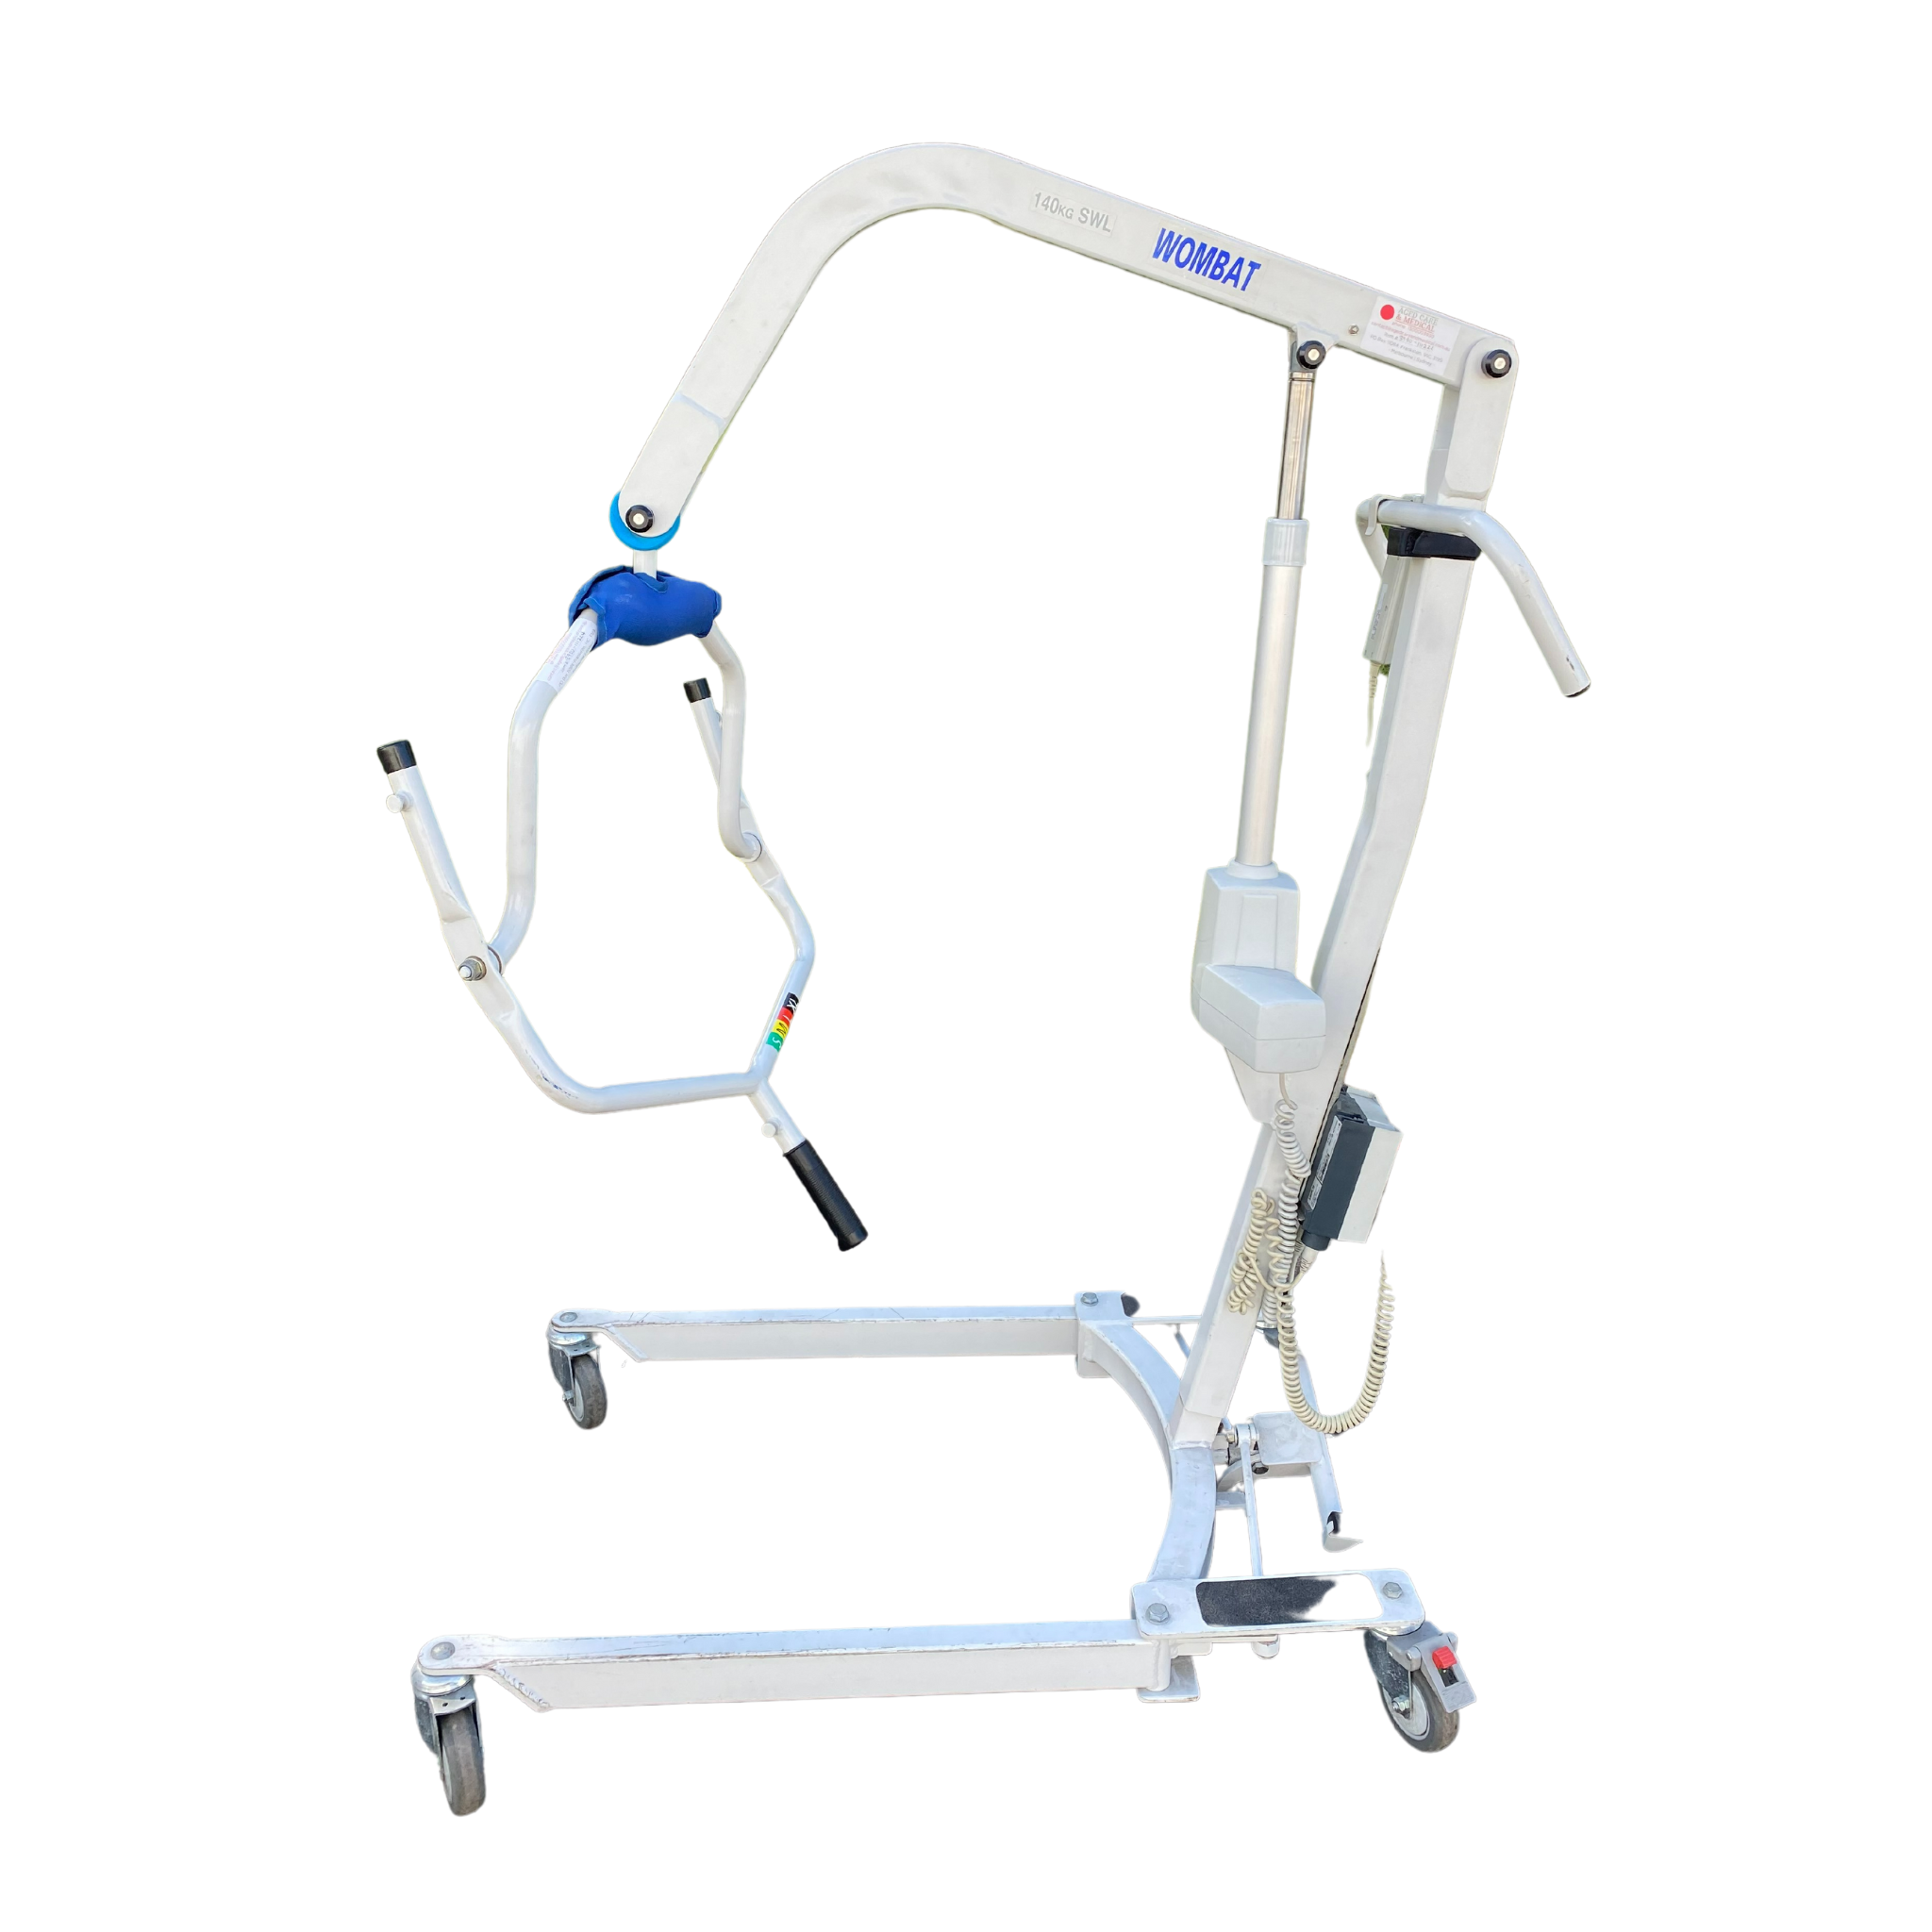 Rental - Wombat Lifter With Pivot Hoist from Aged Care and Medical - Hoist for hire for aged care